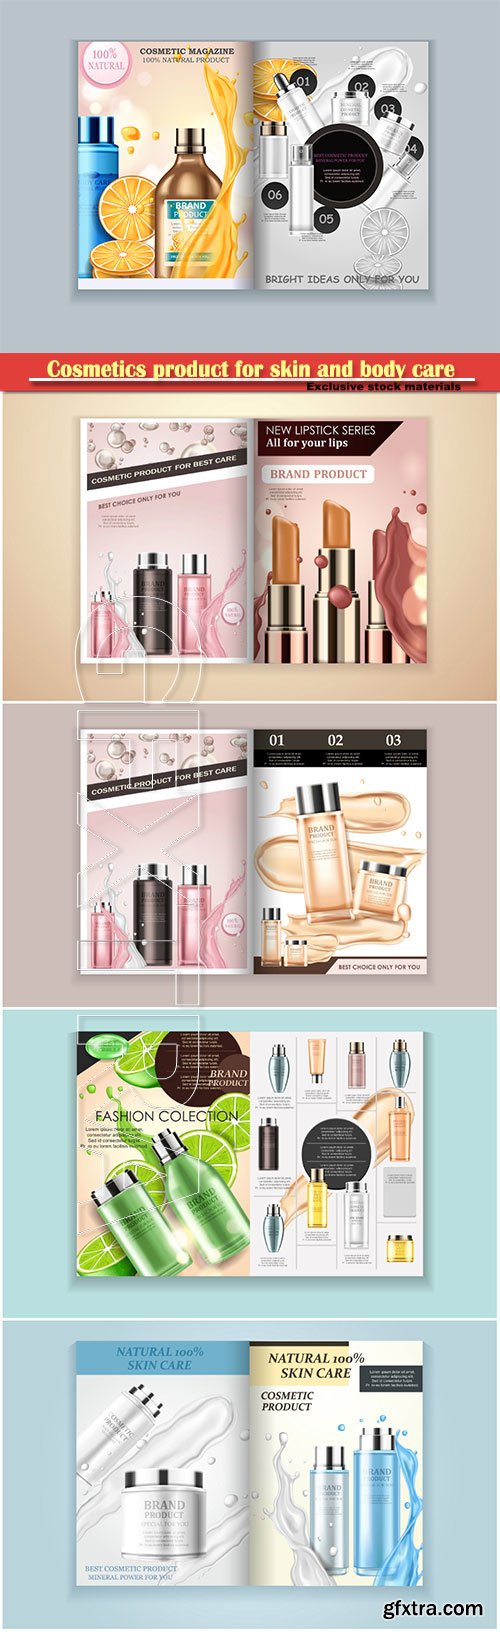 Cosmetics product for skin and body care vector design